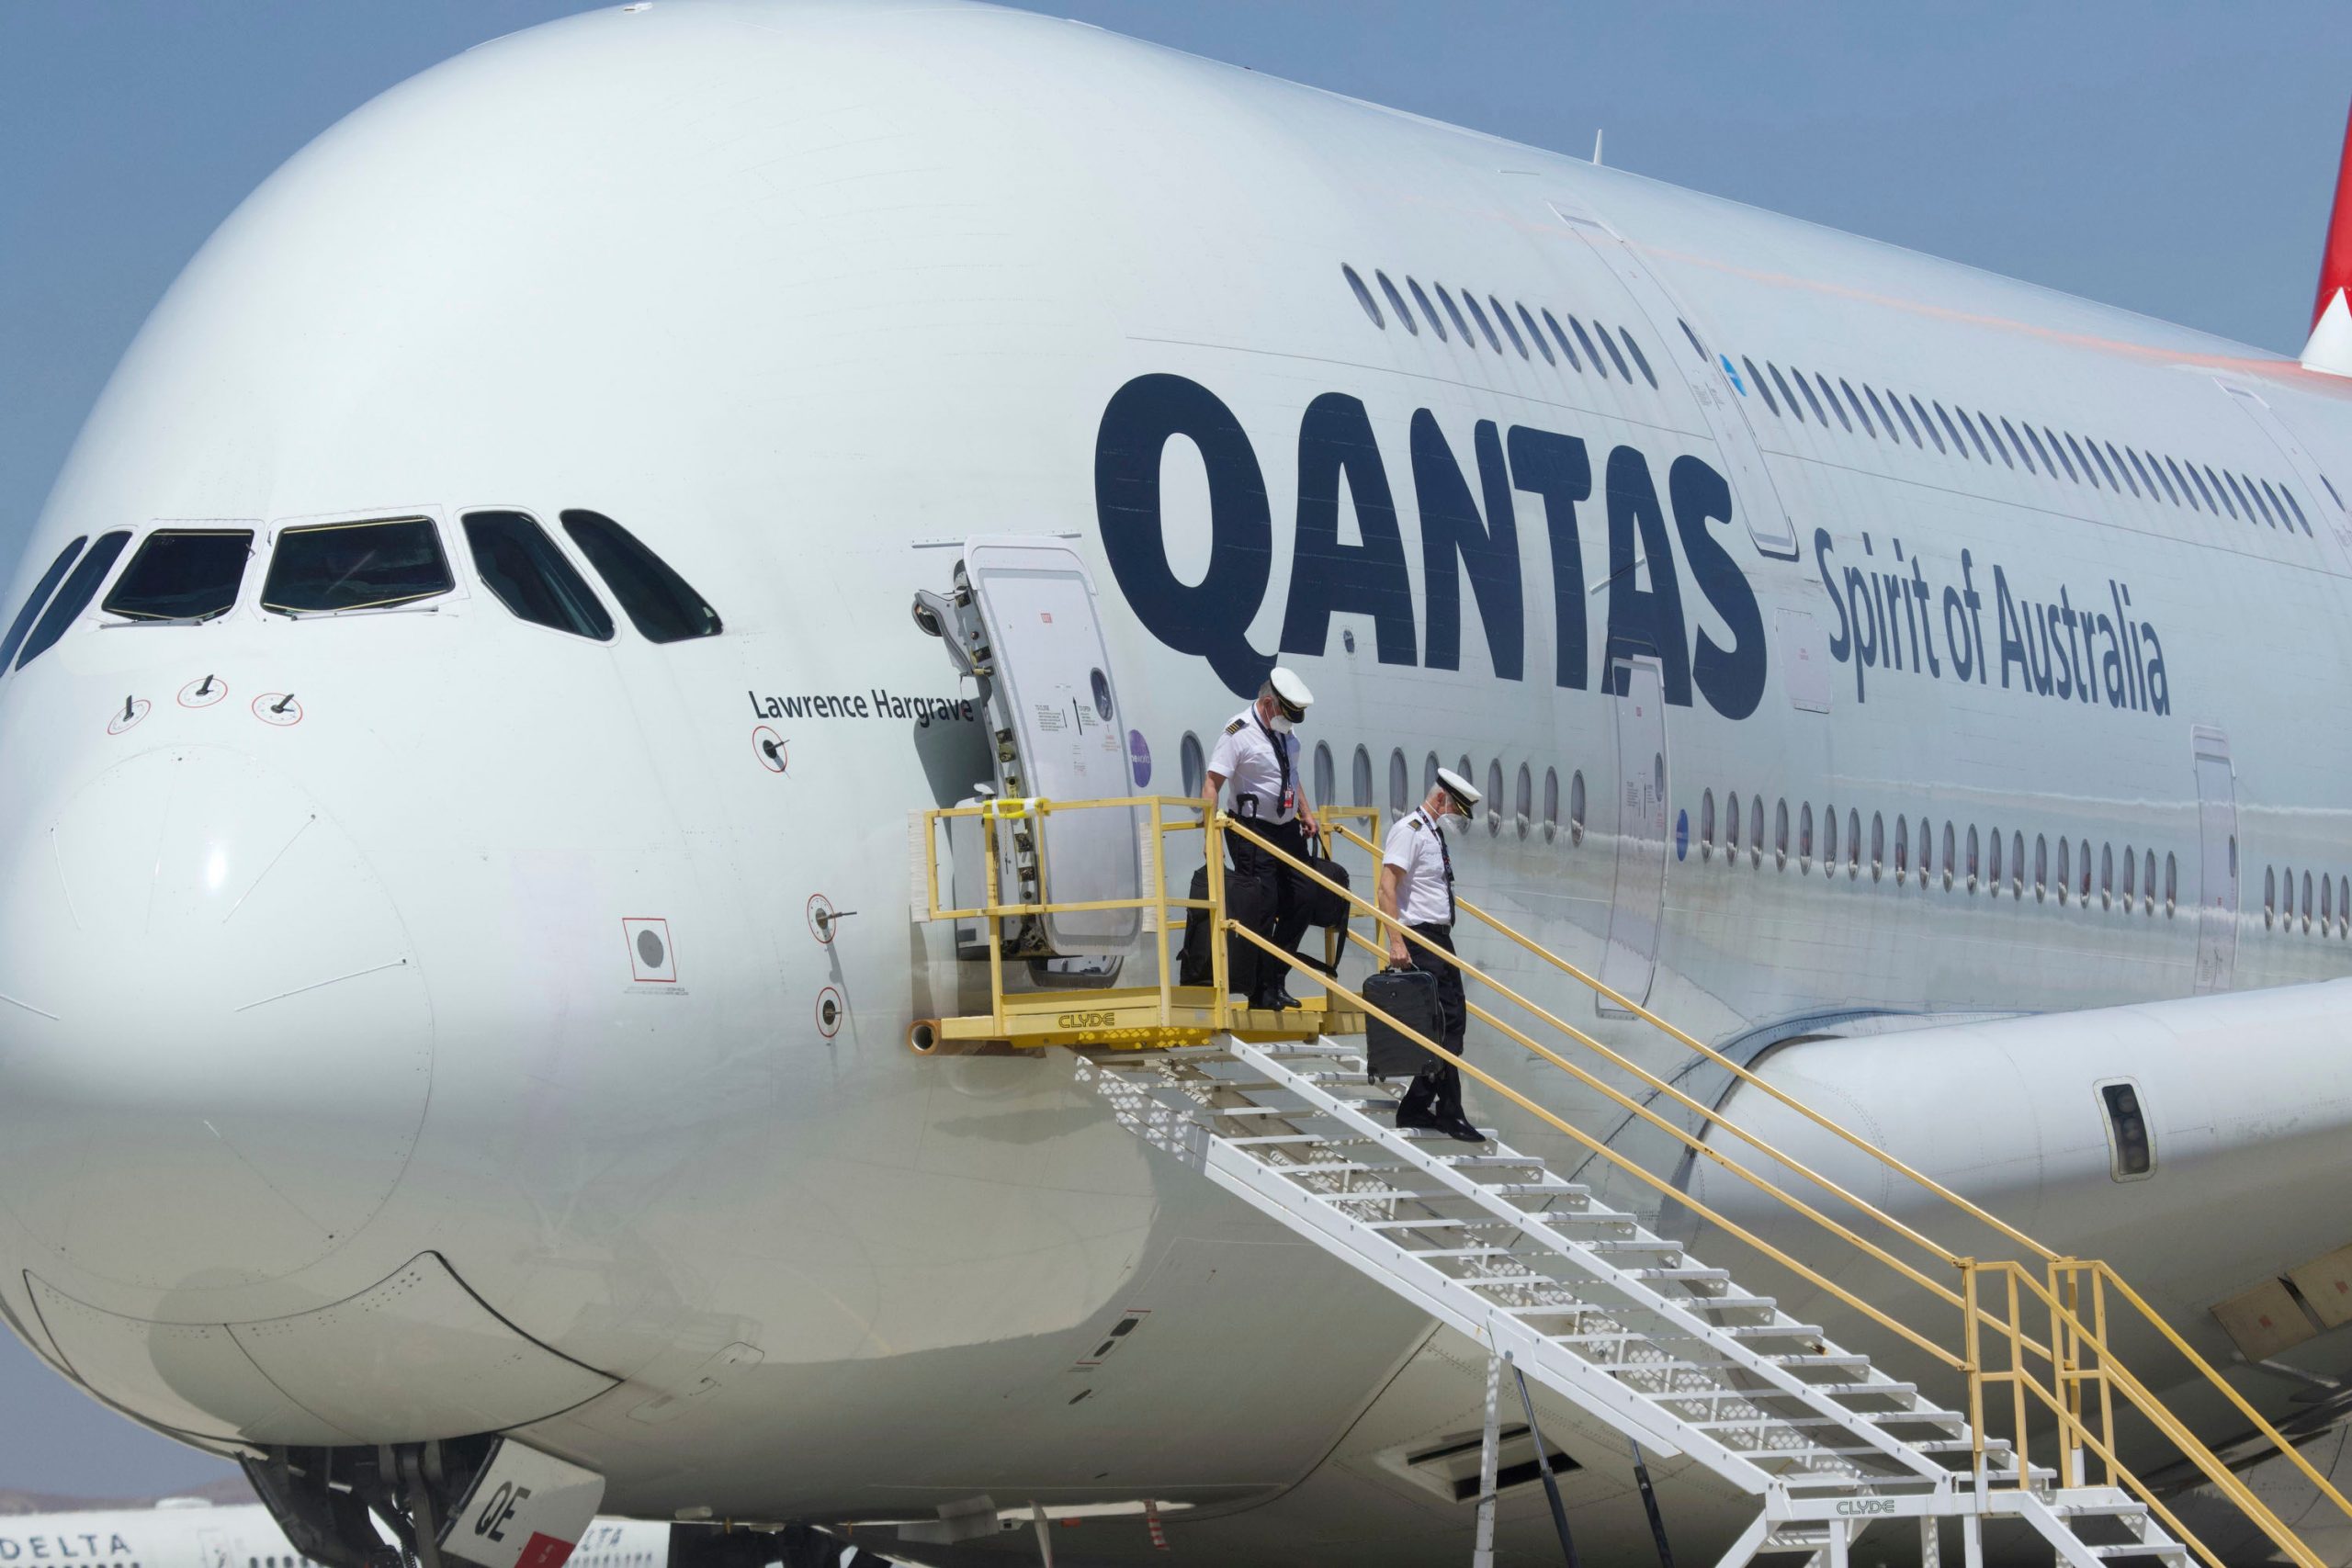 Australian airline QANTAS scaled back centennial celebrations due to Covid-19